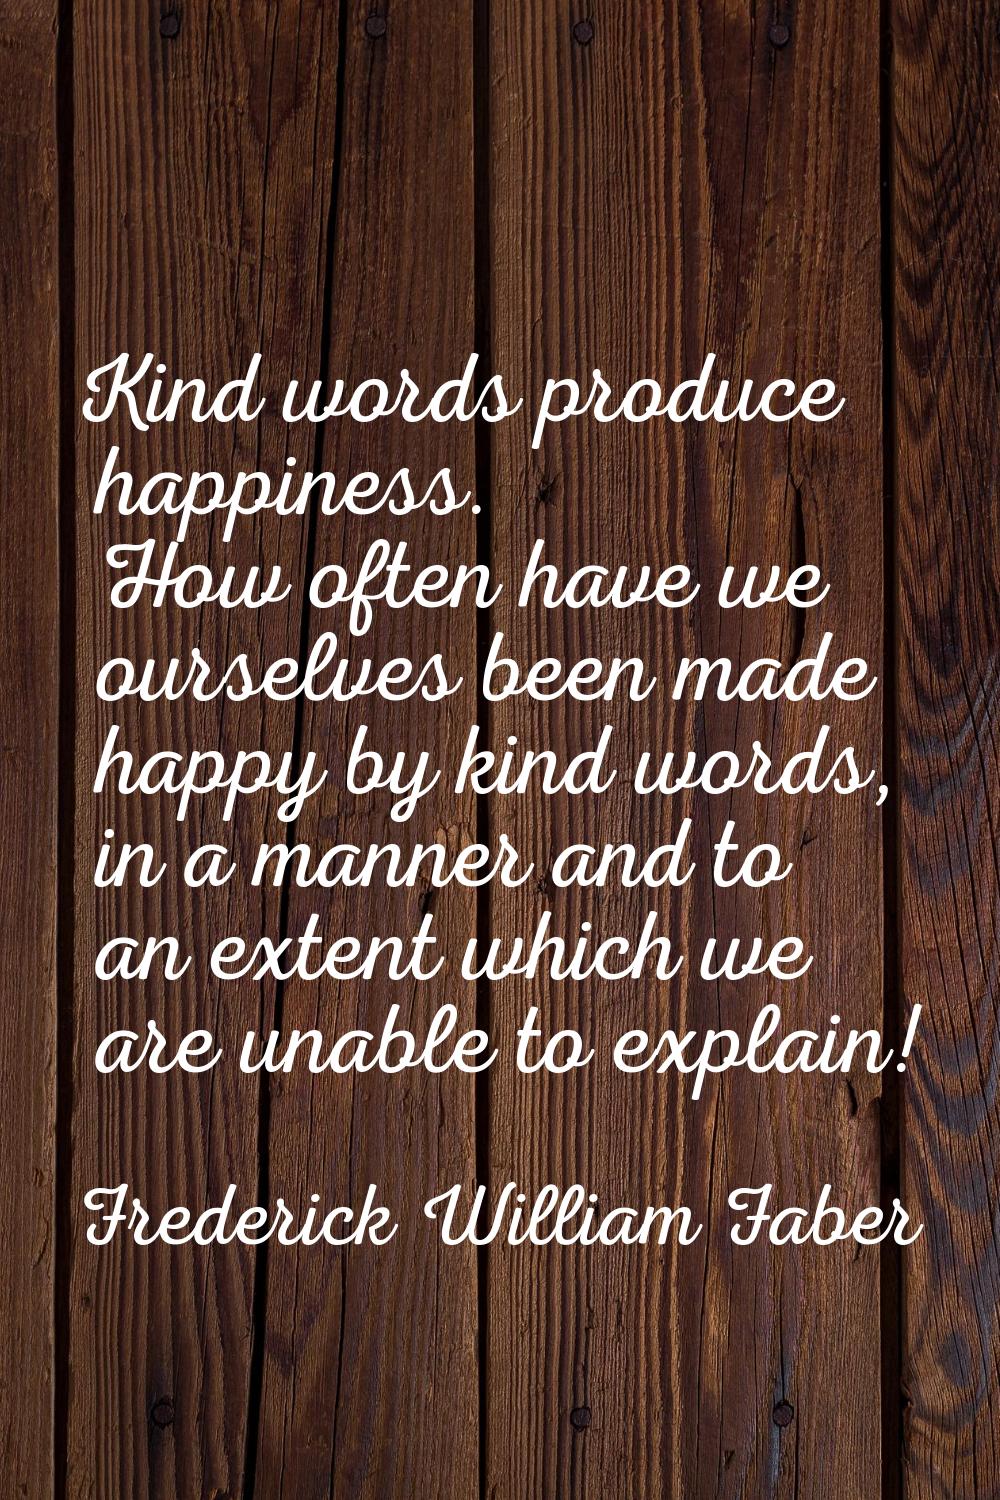 Kind words produce happiness. How often have we ourselves been made happy by kind words, in a manne